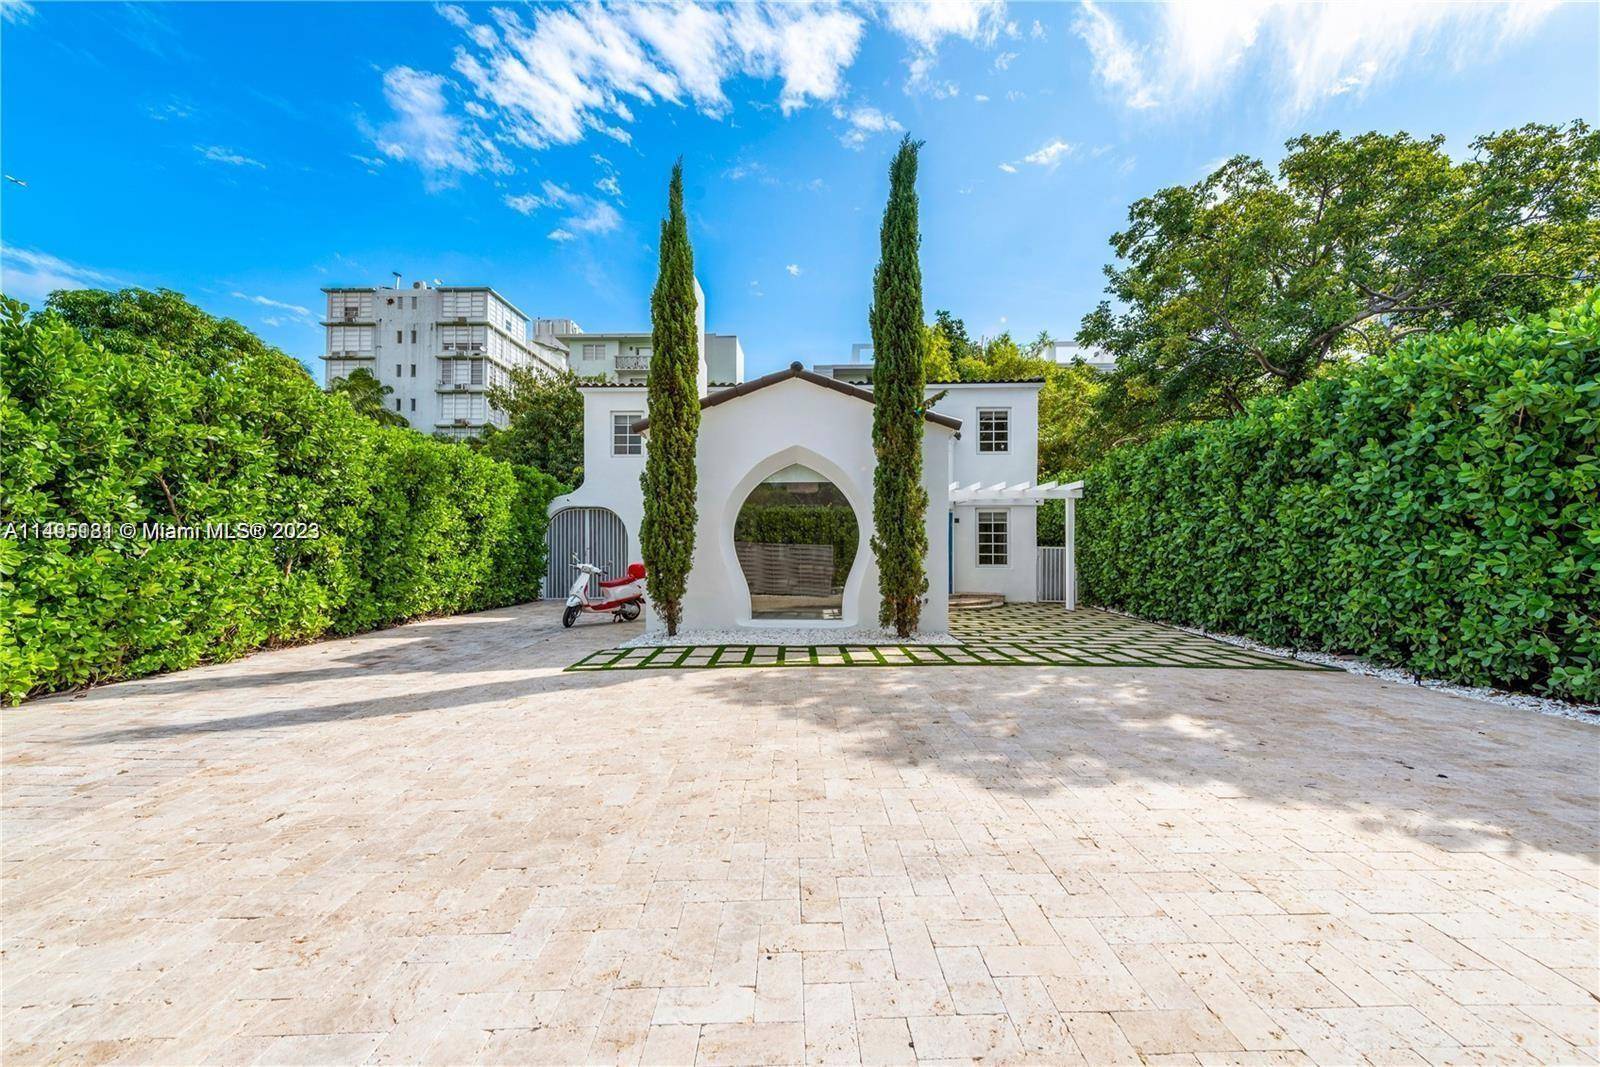 An Iconic Furnished Art Deco 'Palm View' South Beach home w an automatic gate that opens to your beautifully manicured paved terrazzo driveway w a checkered grass inset.